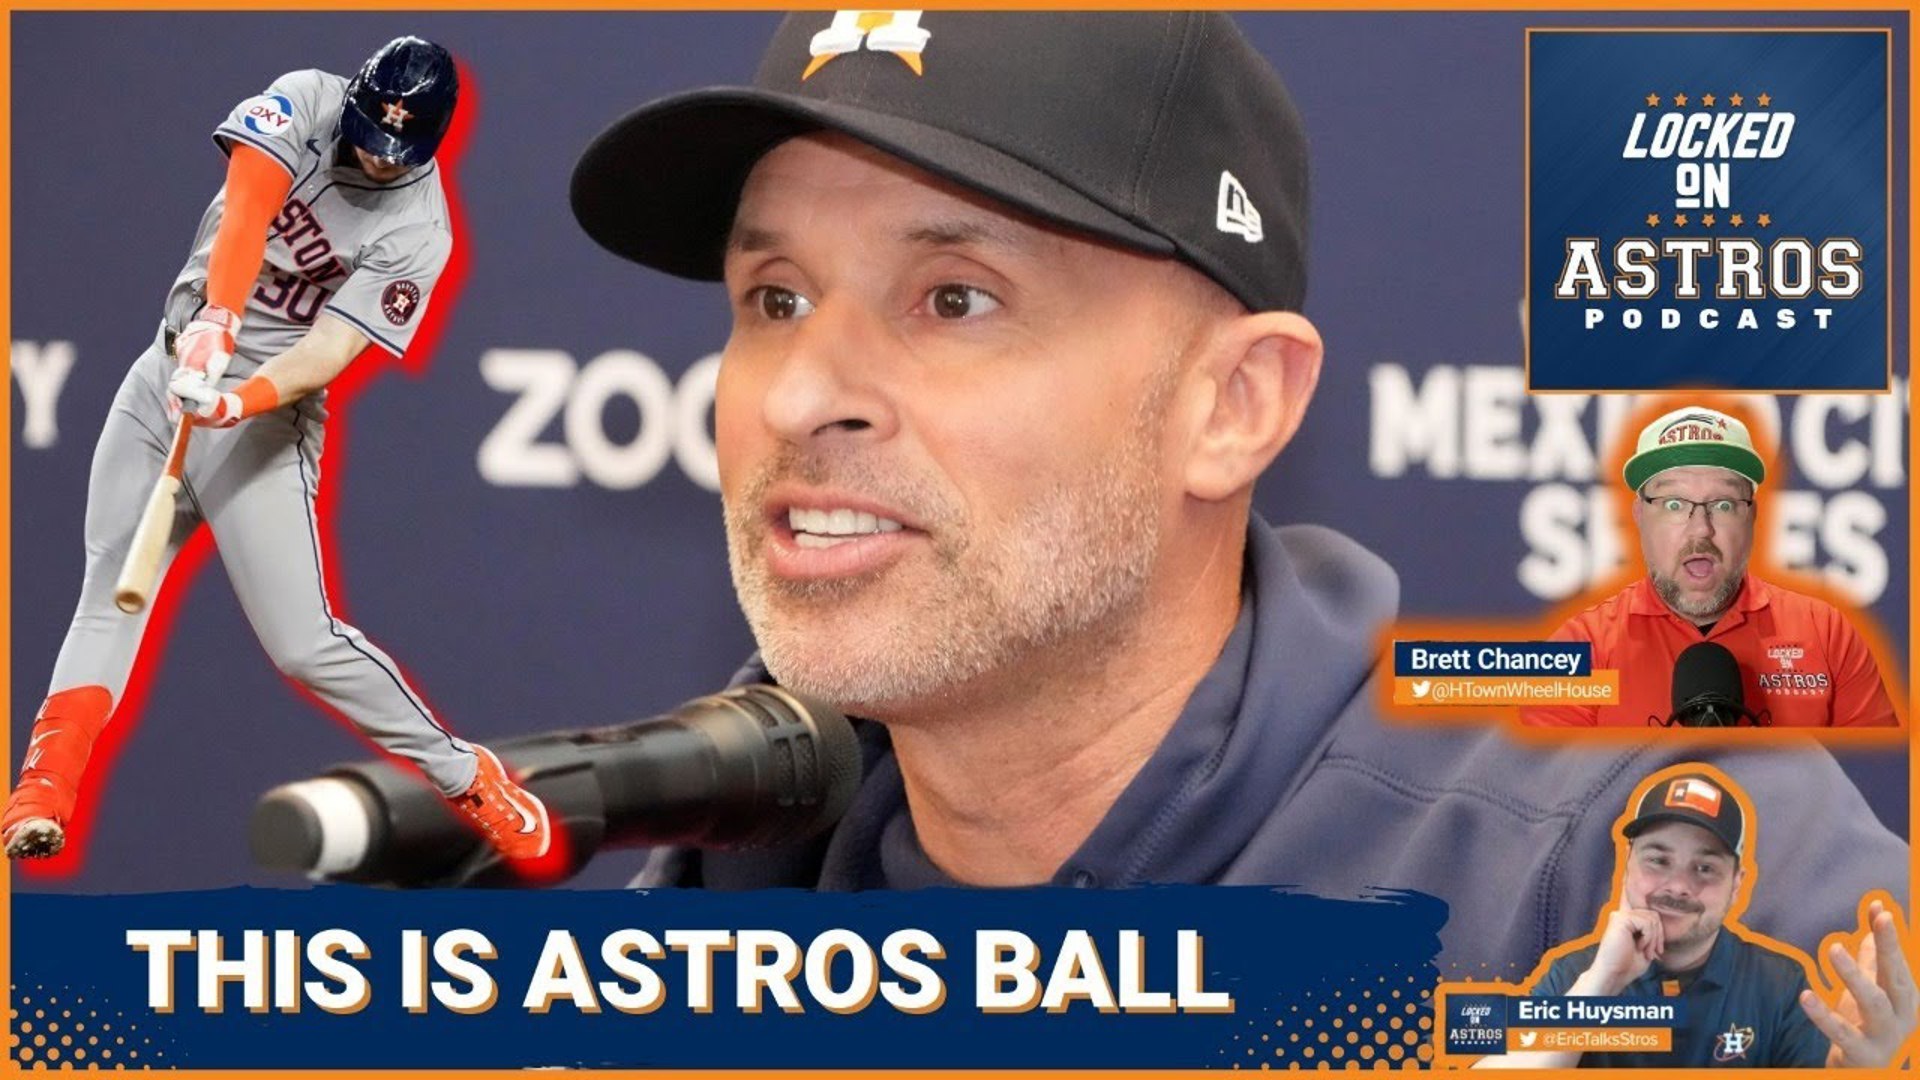 Astros win playing H-Town baseball in Mexico City & Loperfido gets called up